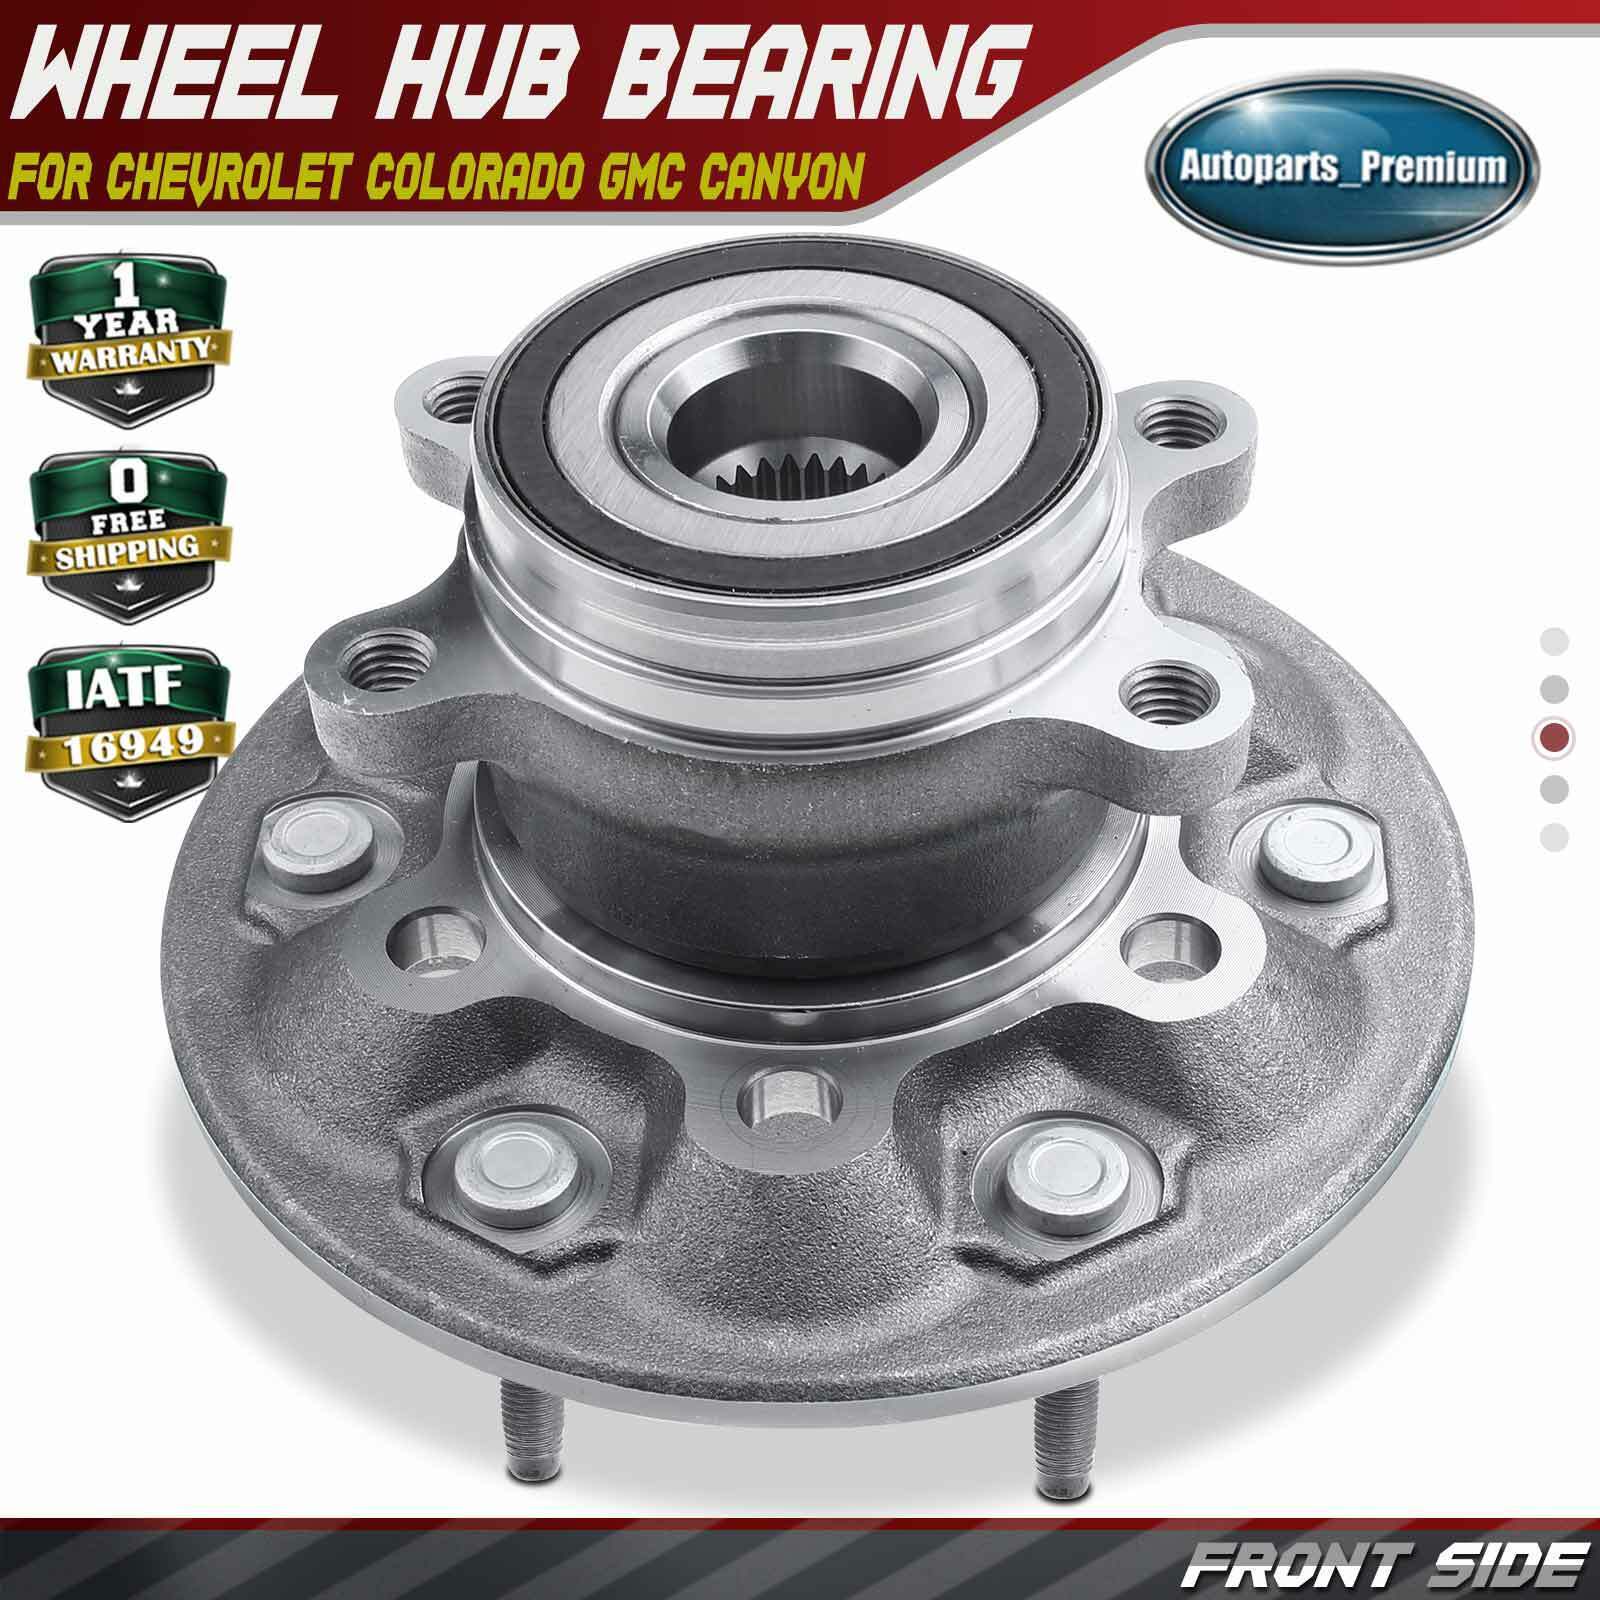 Front LH or RH Wheel Hub Bearing Assembly for GMC Canyon Chevrolet Colorado 4WD